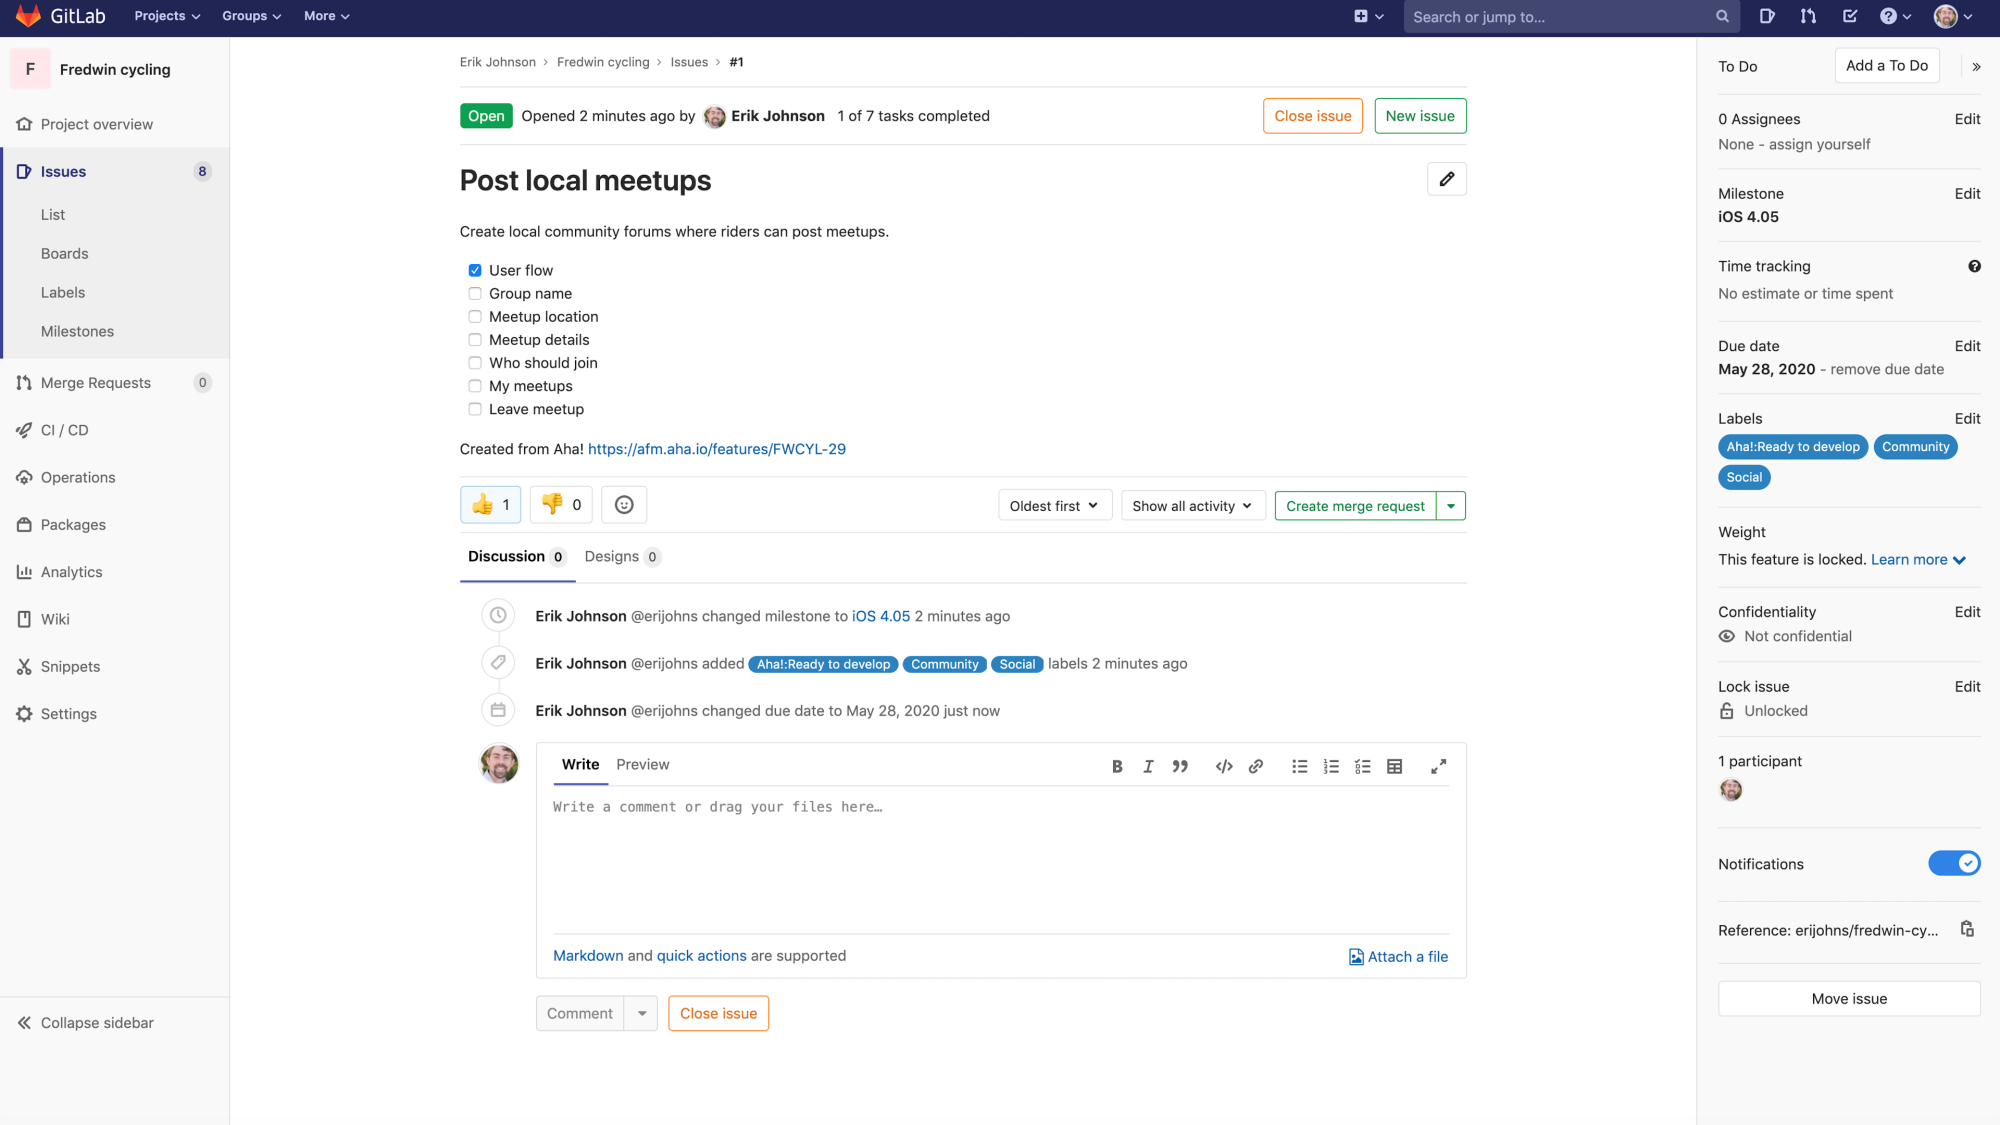 Features appear as issues in GitLab for engineering to work on.